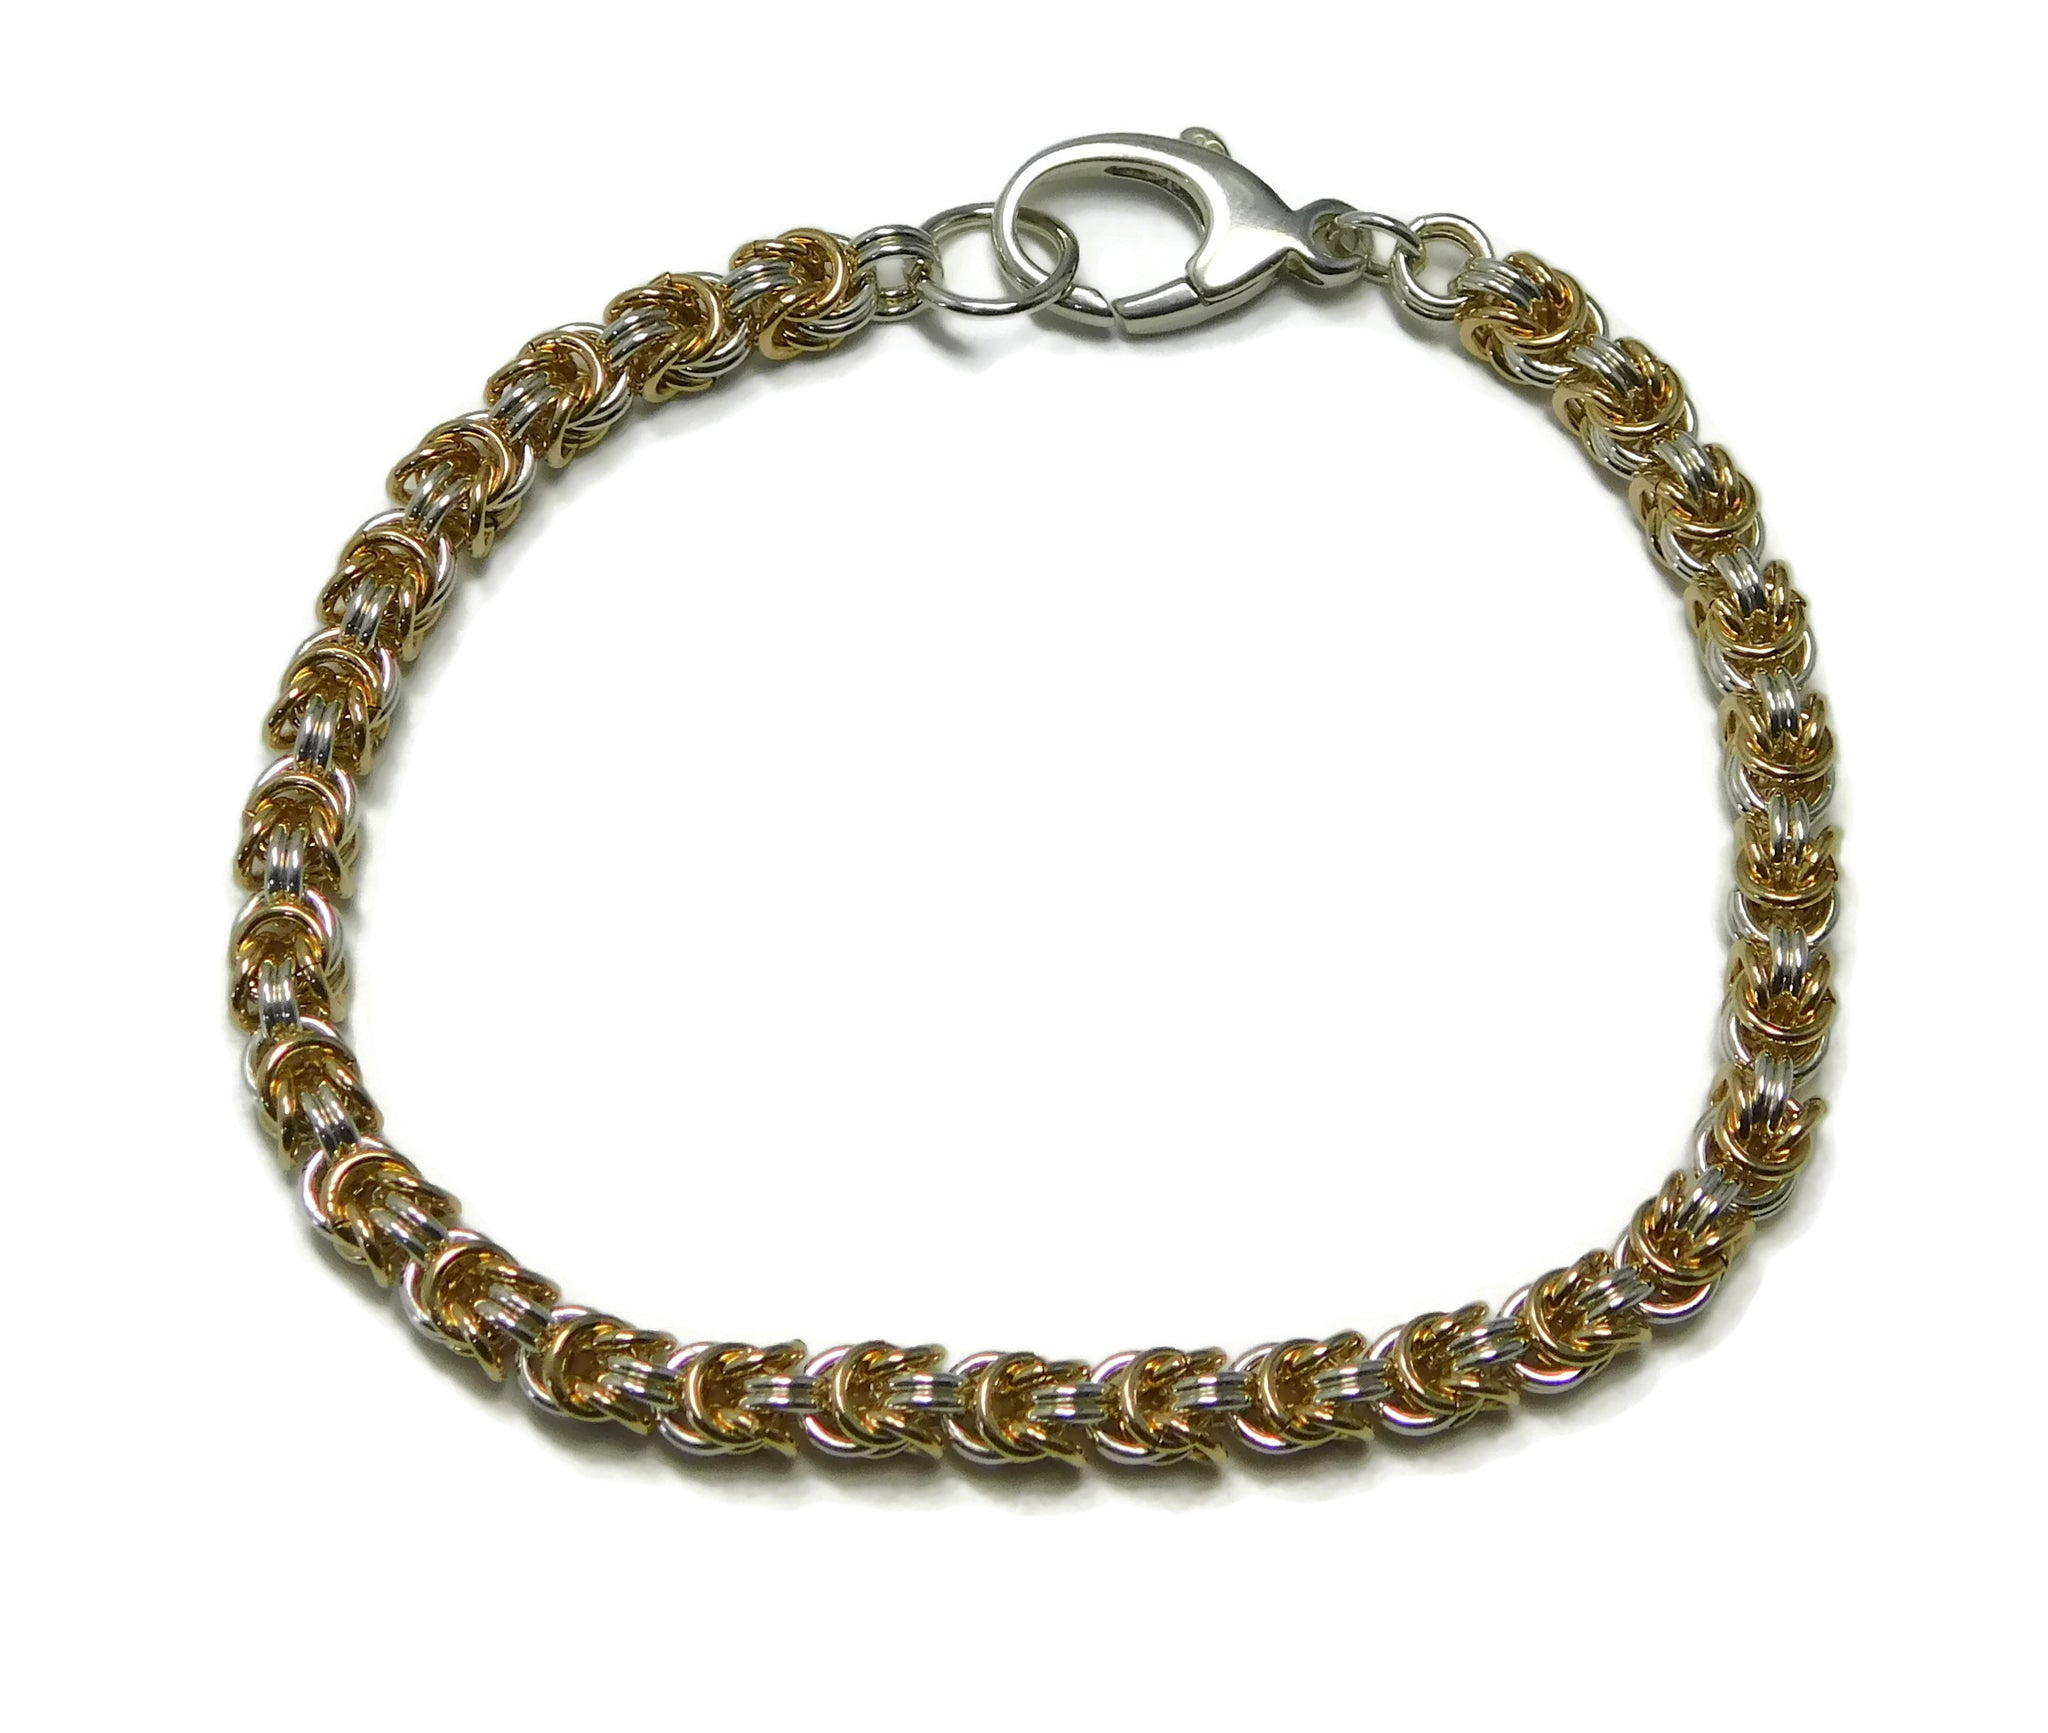 Sterling Silver and 14kt Gold Fill Rosetta Weave Chainmaille Bracelet